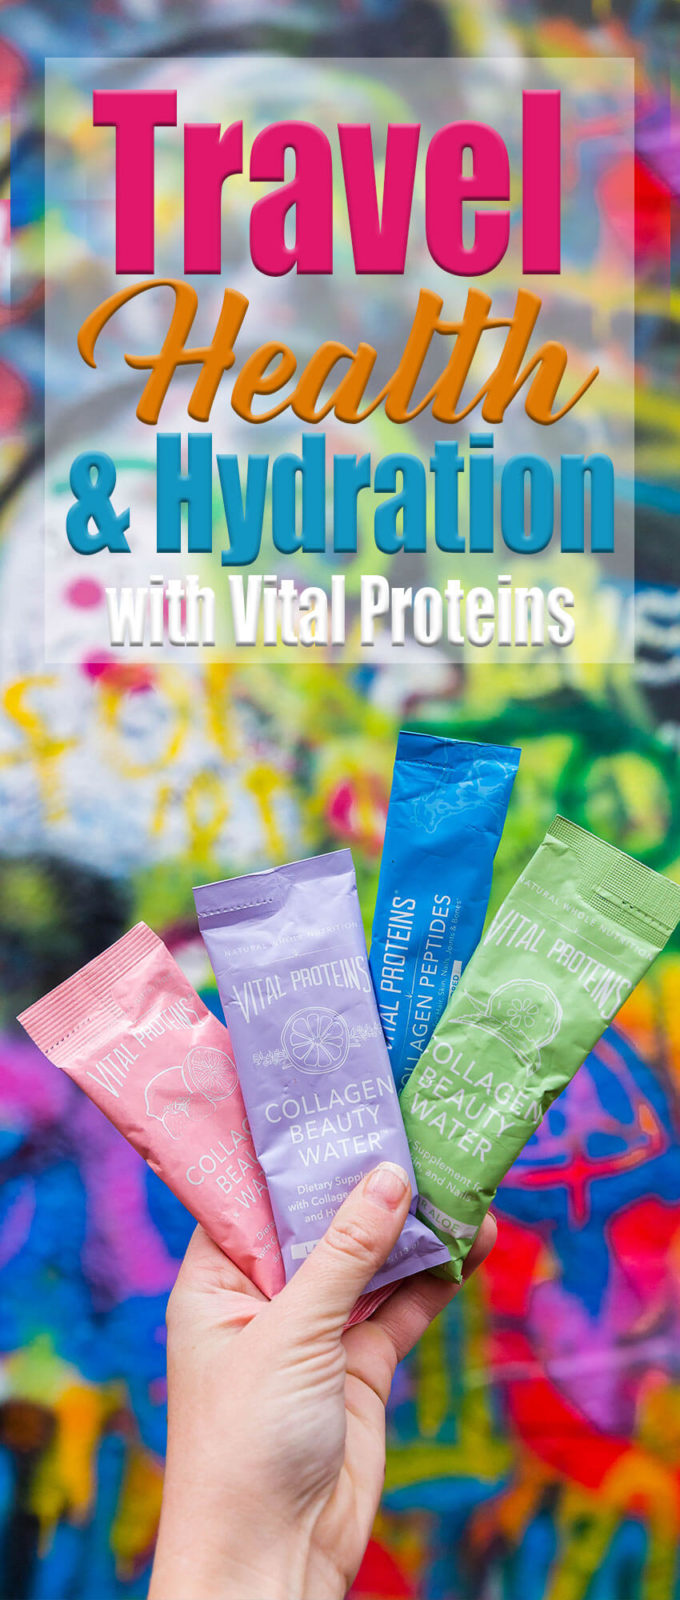 Travel health and hydration with vital proteins